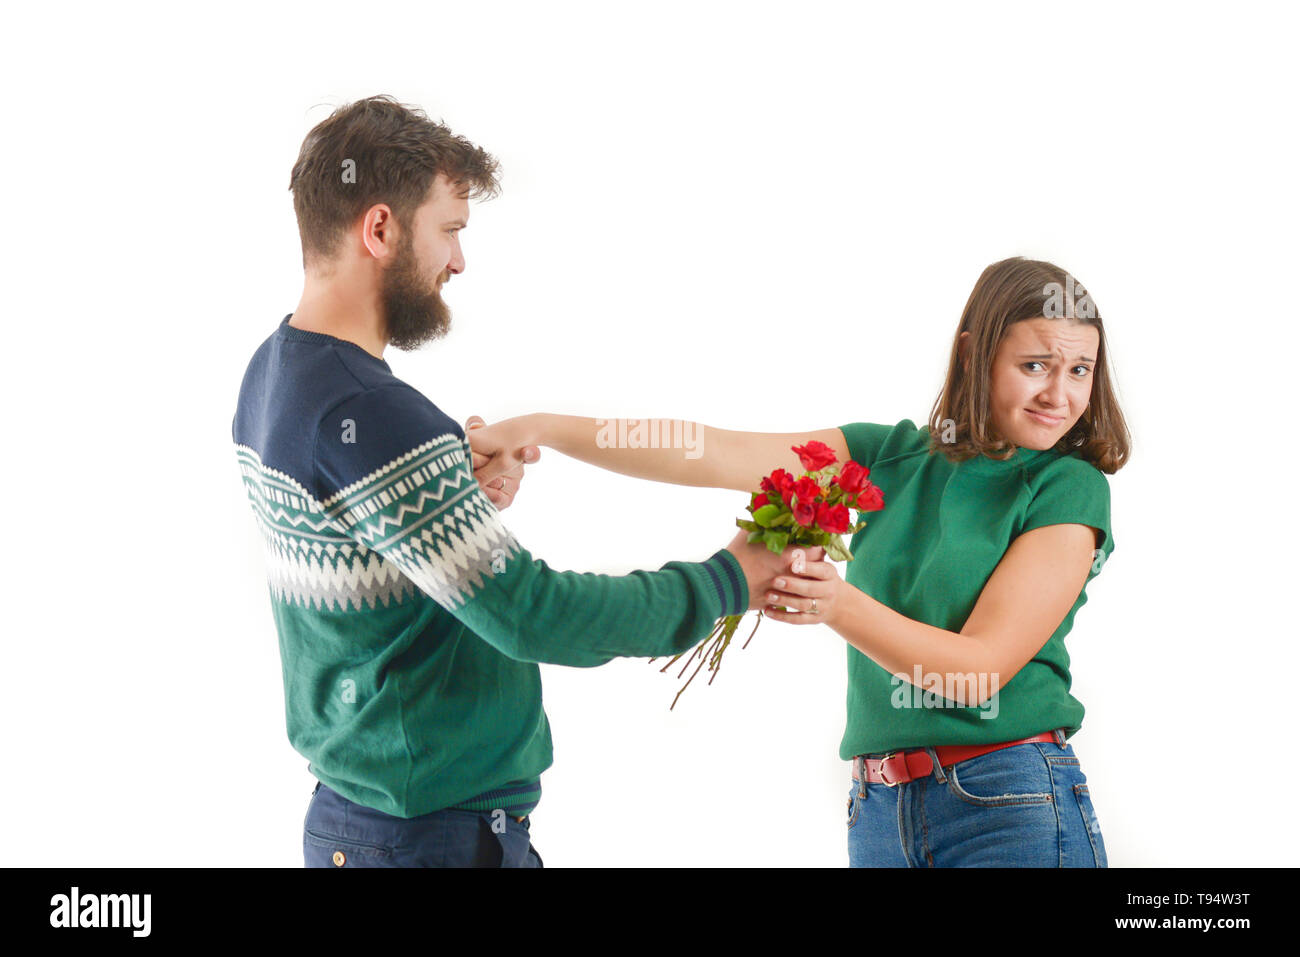 young man been rejected by a young woman on velentine's day Stock Photo